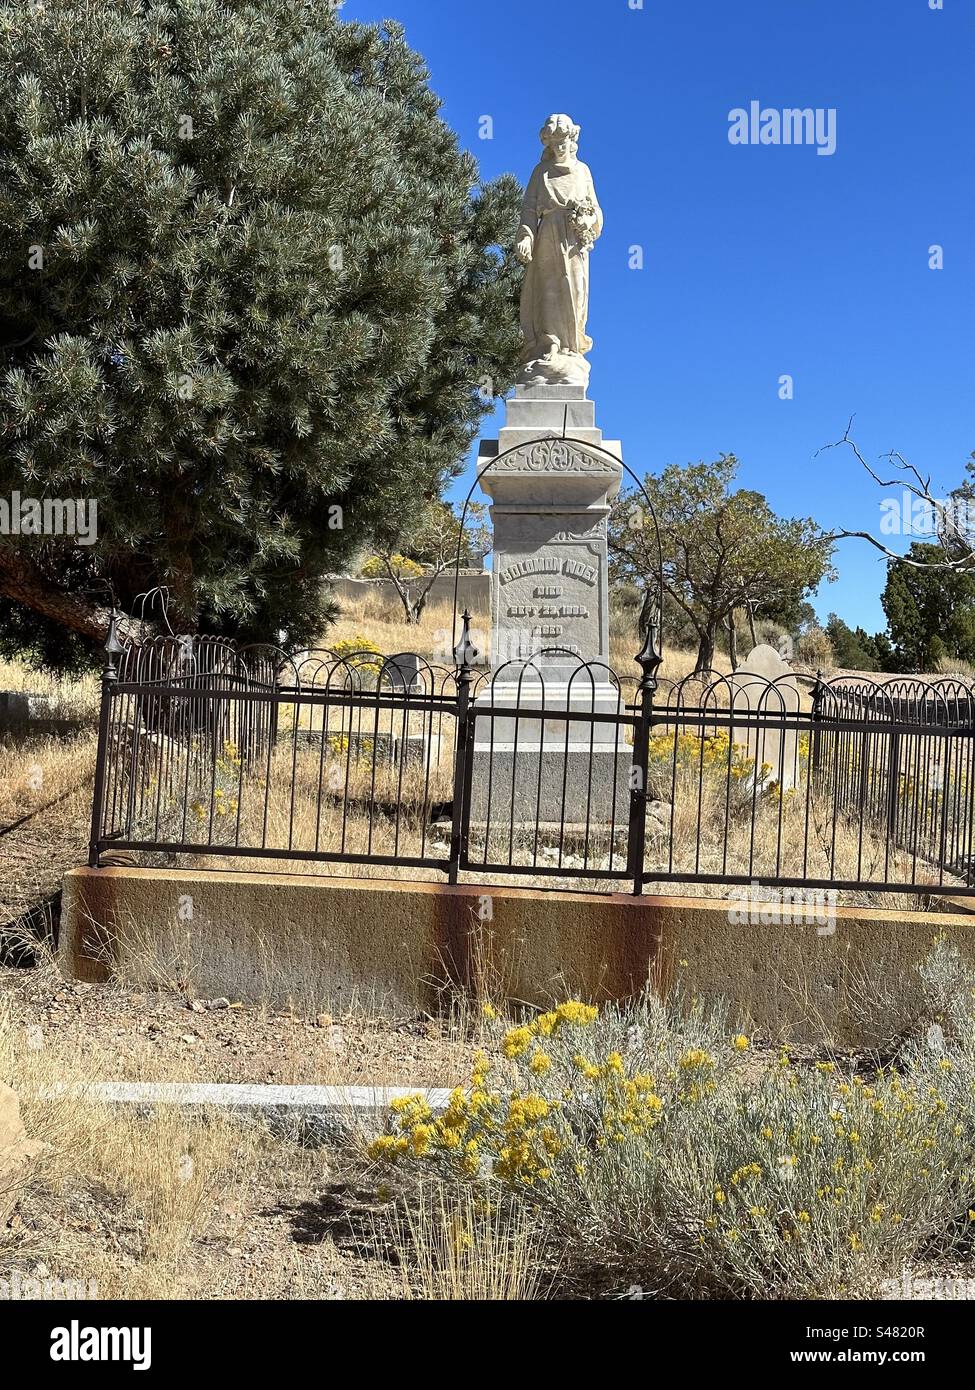 This marble monument marks the gravesite of Solomon Noel (1895) and Catherine Noel (1896) in the Masonic section of Silver Terrace Cemeteries, Virginia City, Nevada. Stock Photo